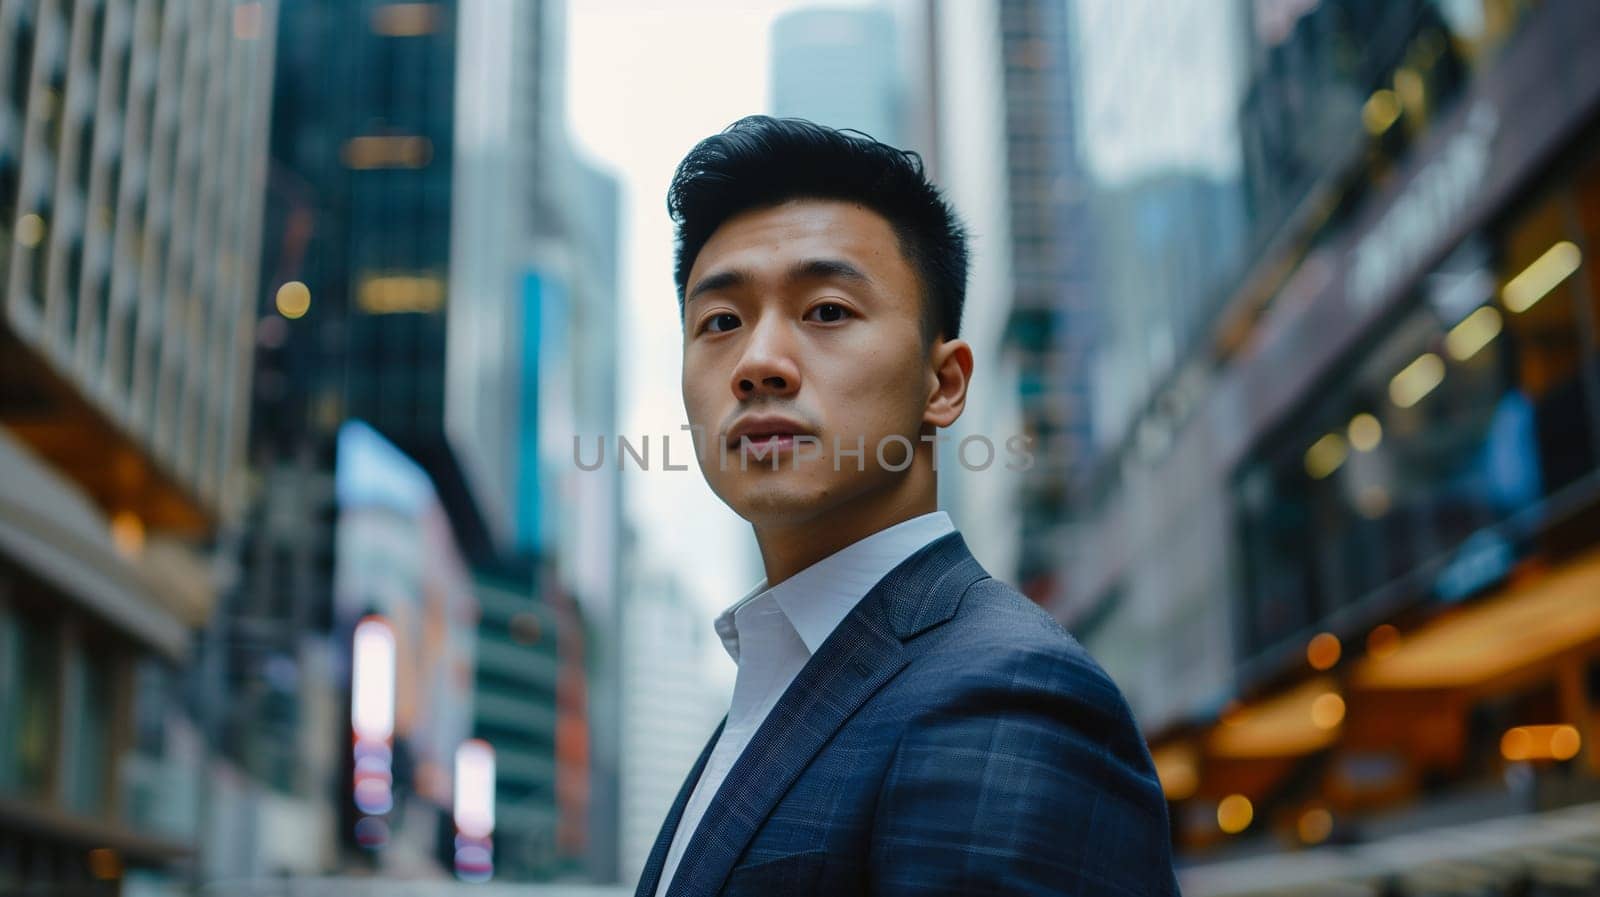 Confident young Asian businessman standing in the city, wearing business suit and looking at camera